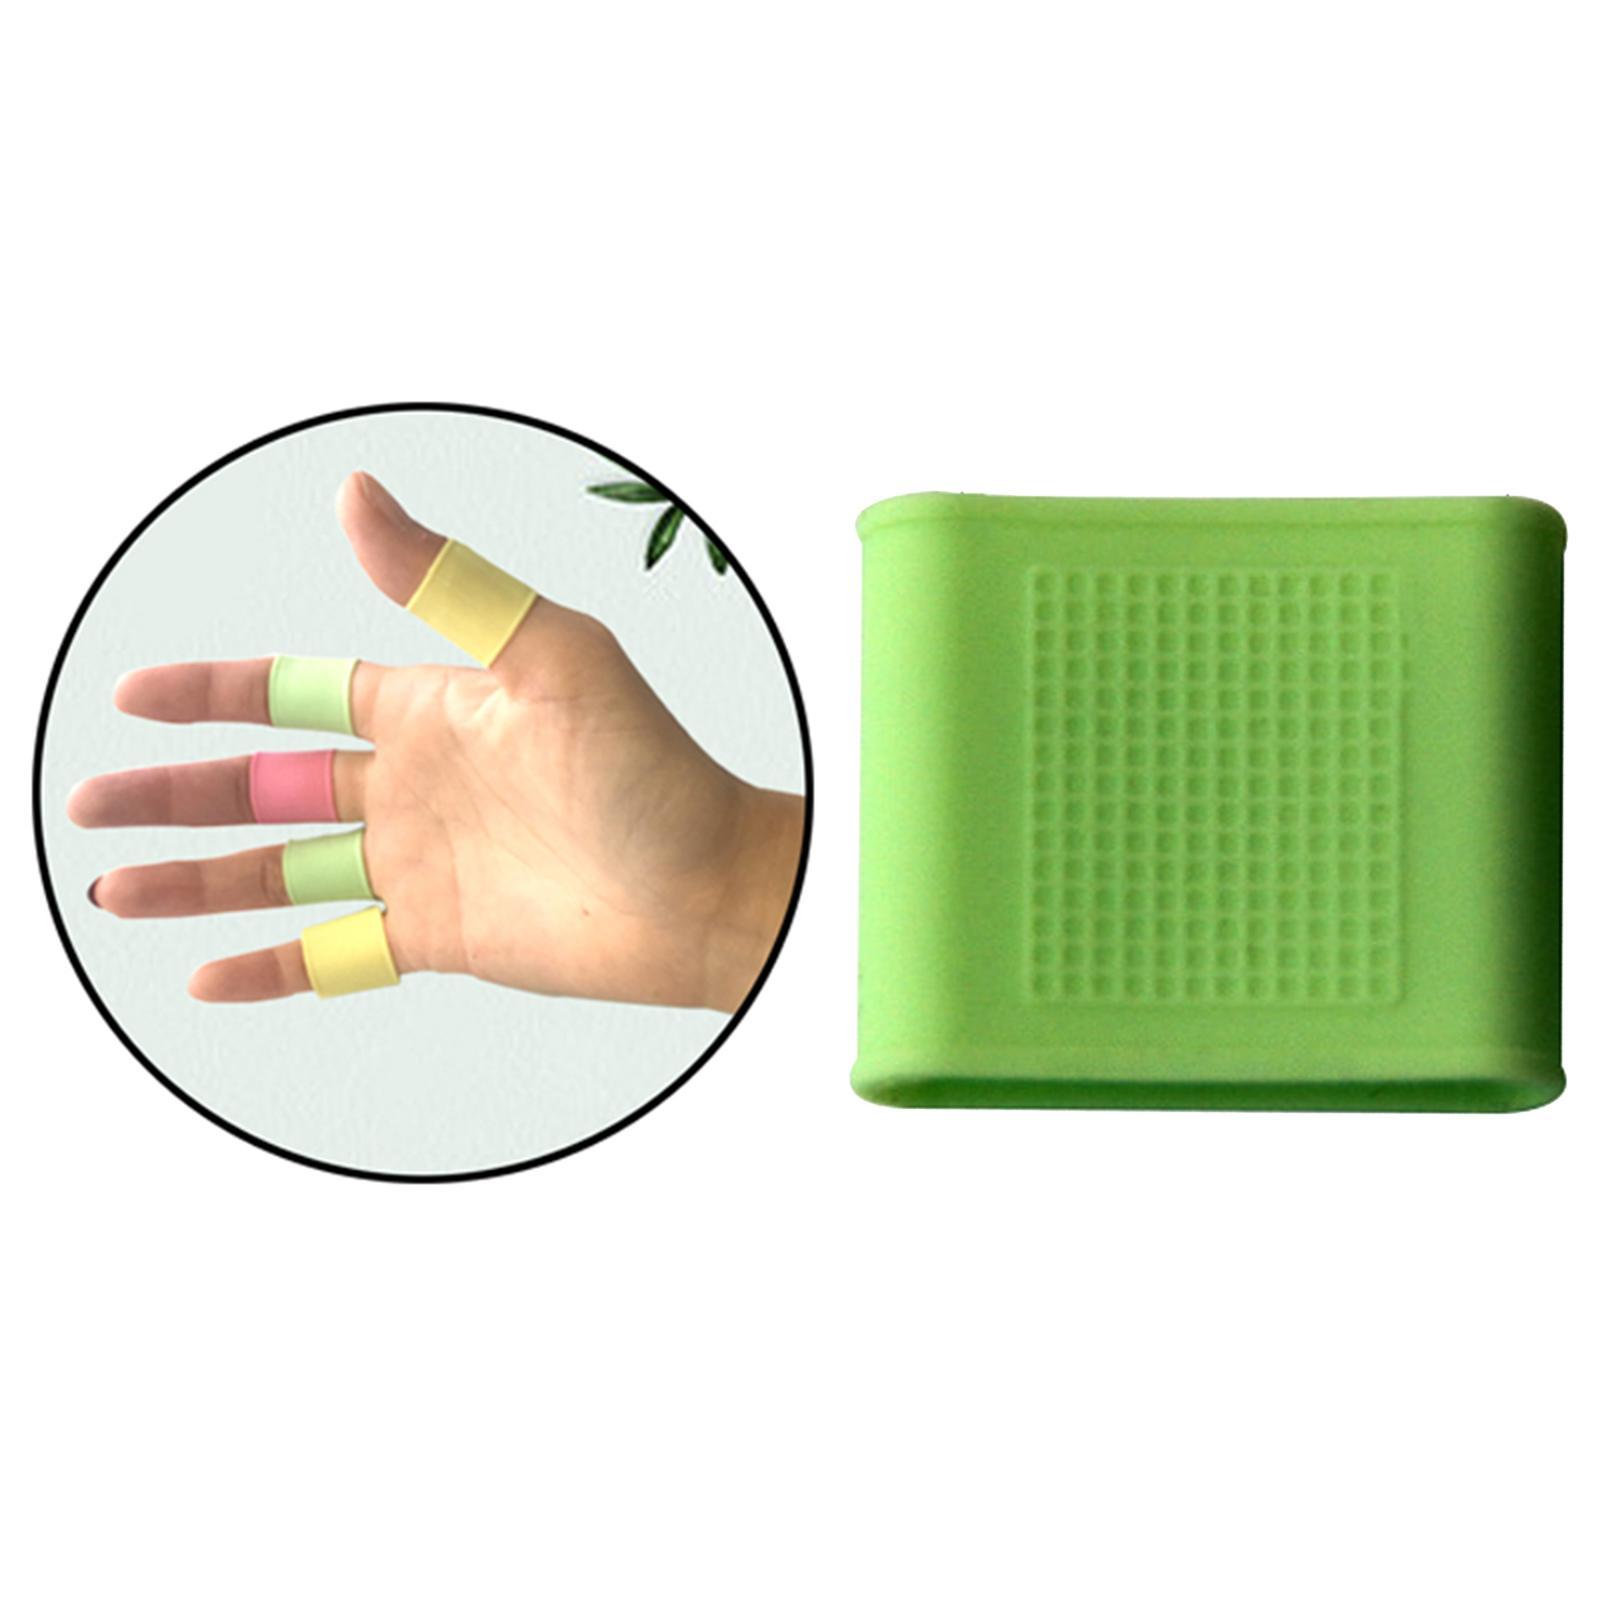 3xSoft Golf Finger Sleeves Silicone Protector Support Wrap Light Green 23mm